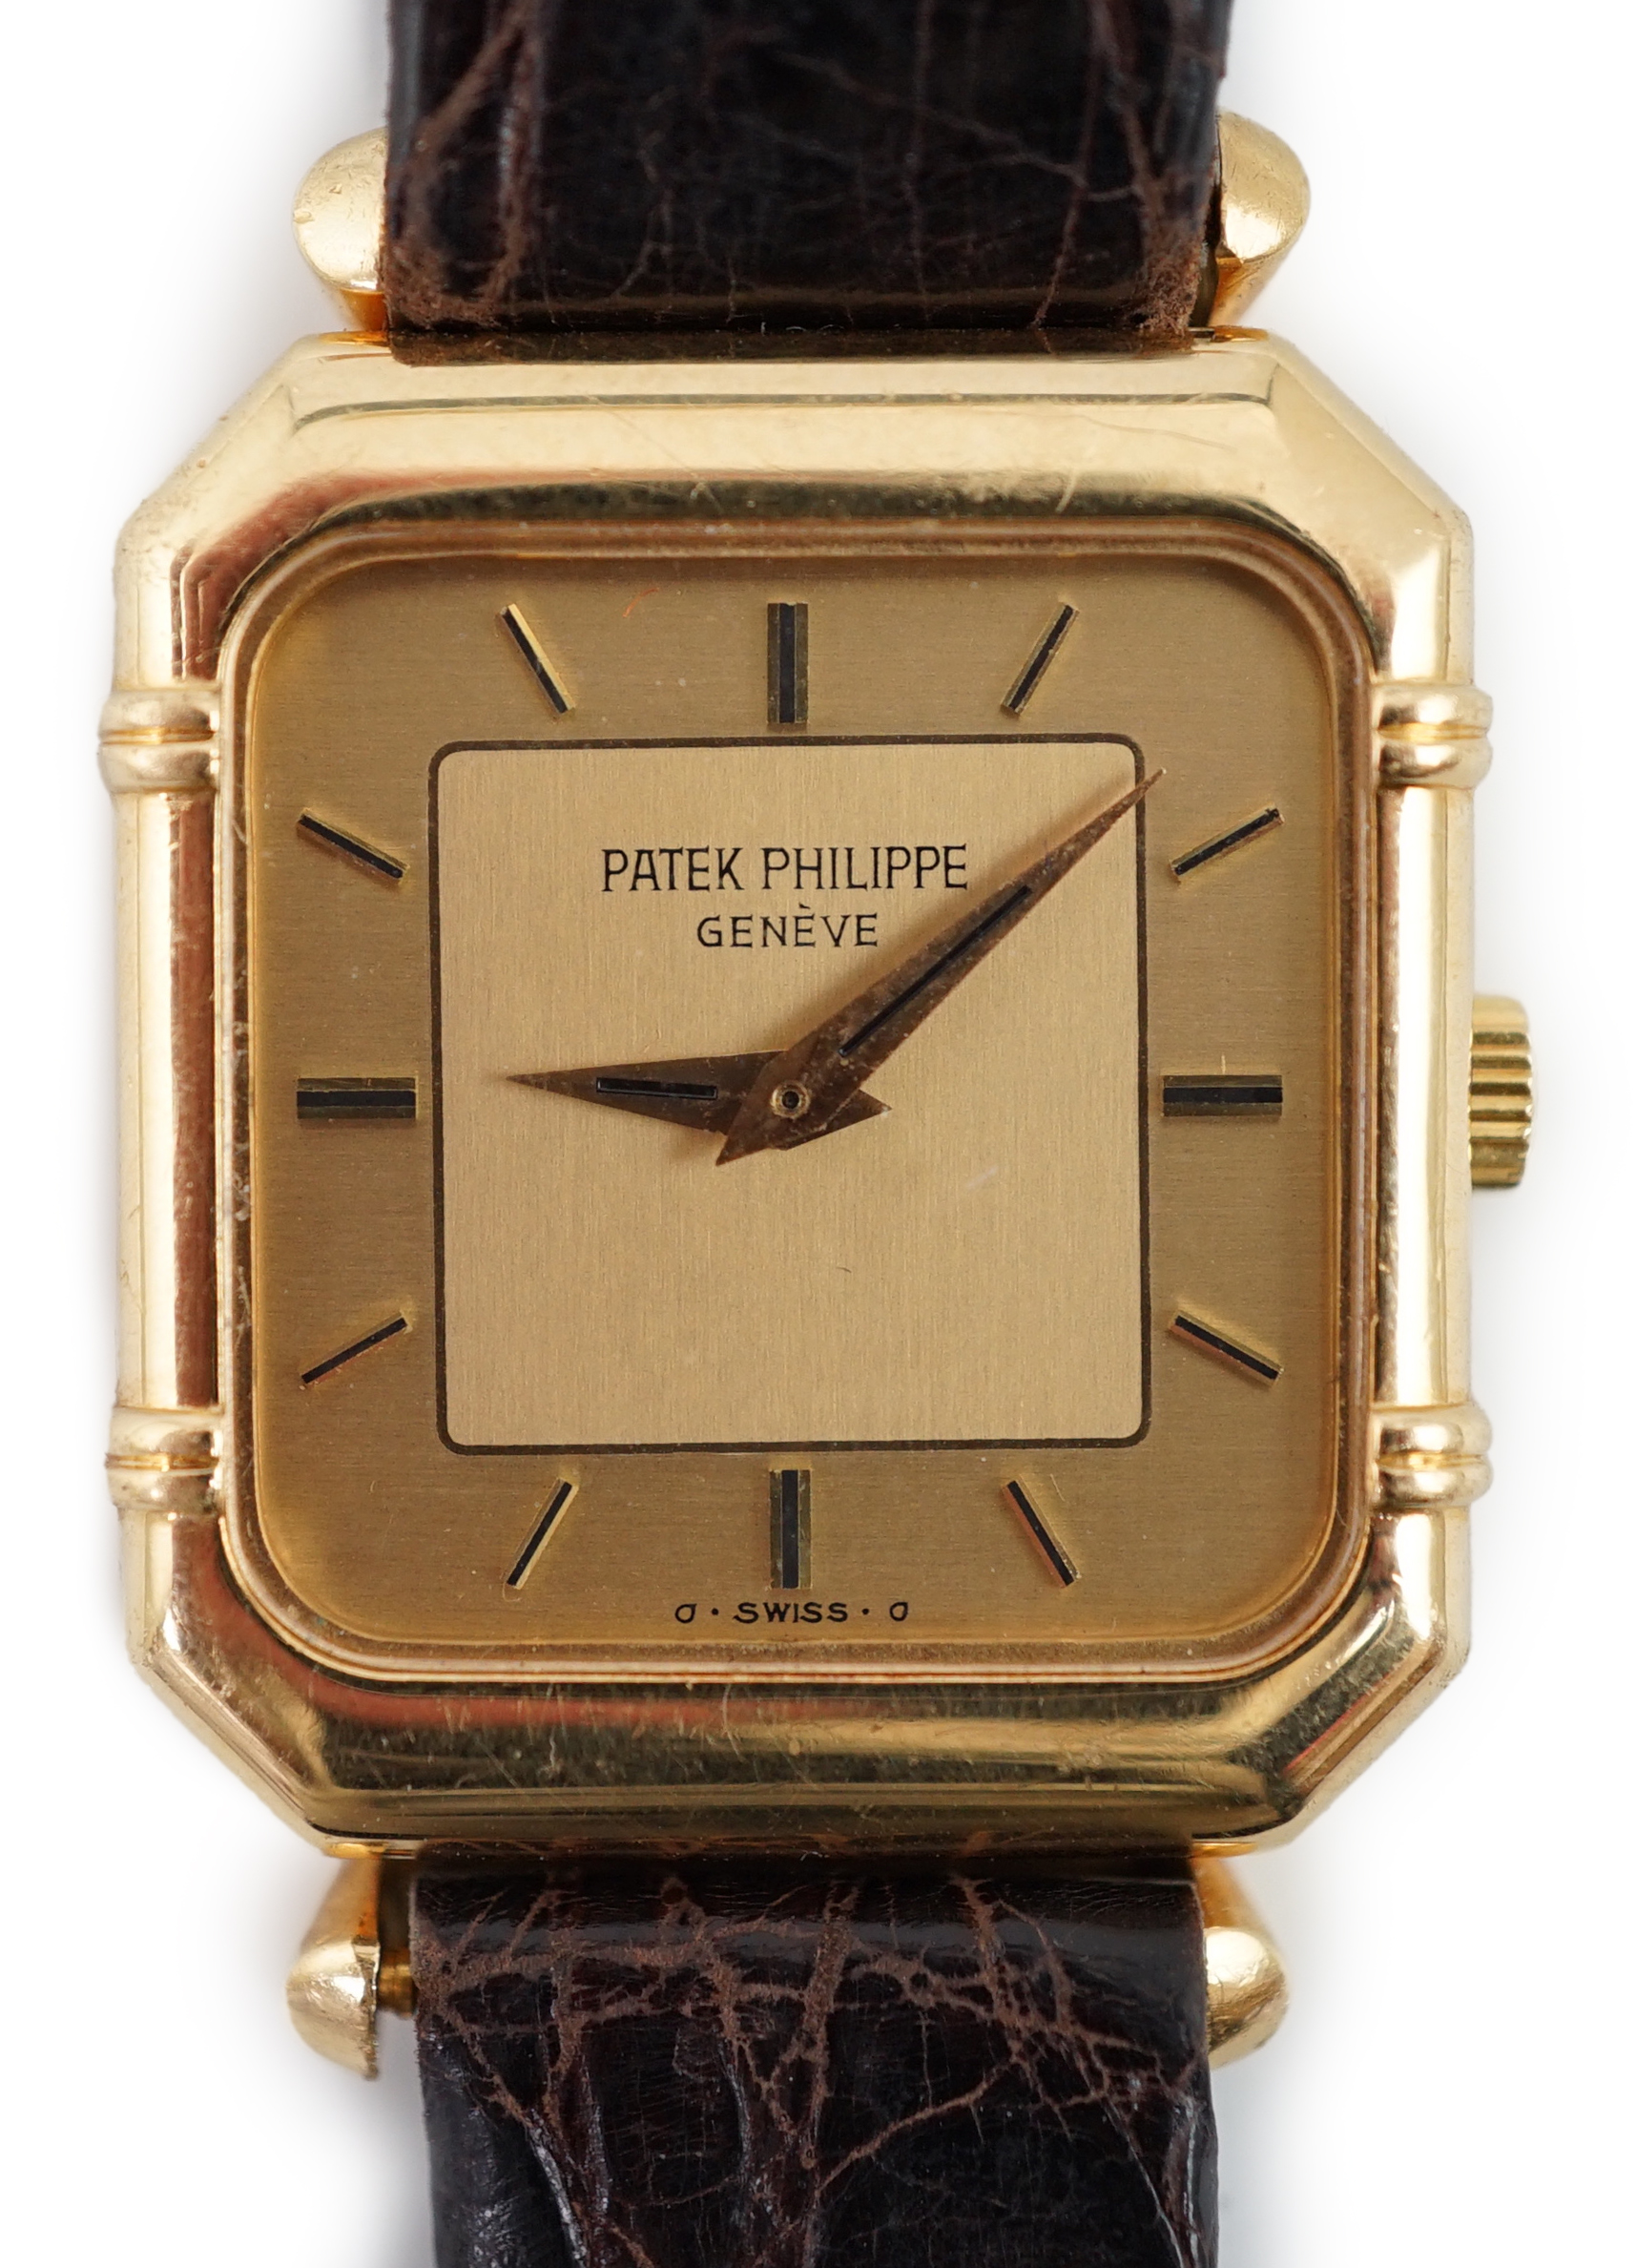 A lady's 18ct gold Patek Philippe manual wind square dial wrist watch